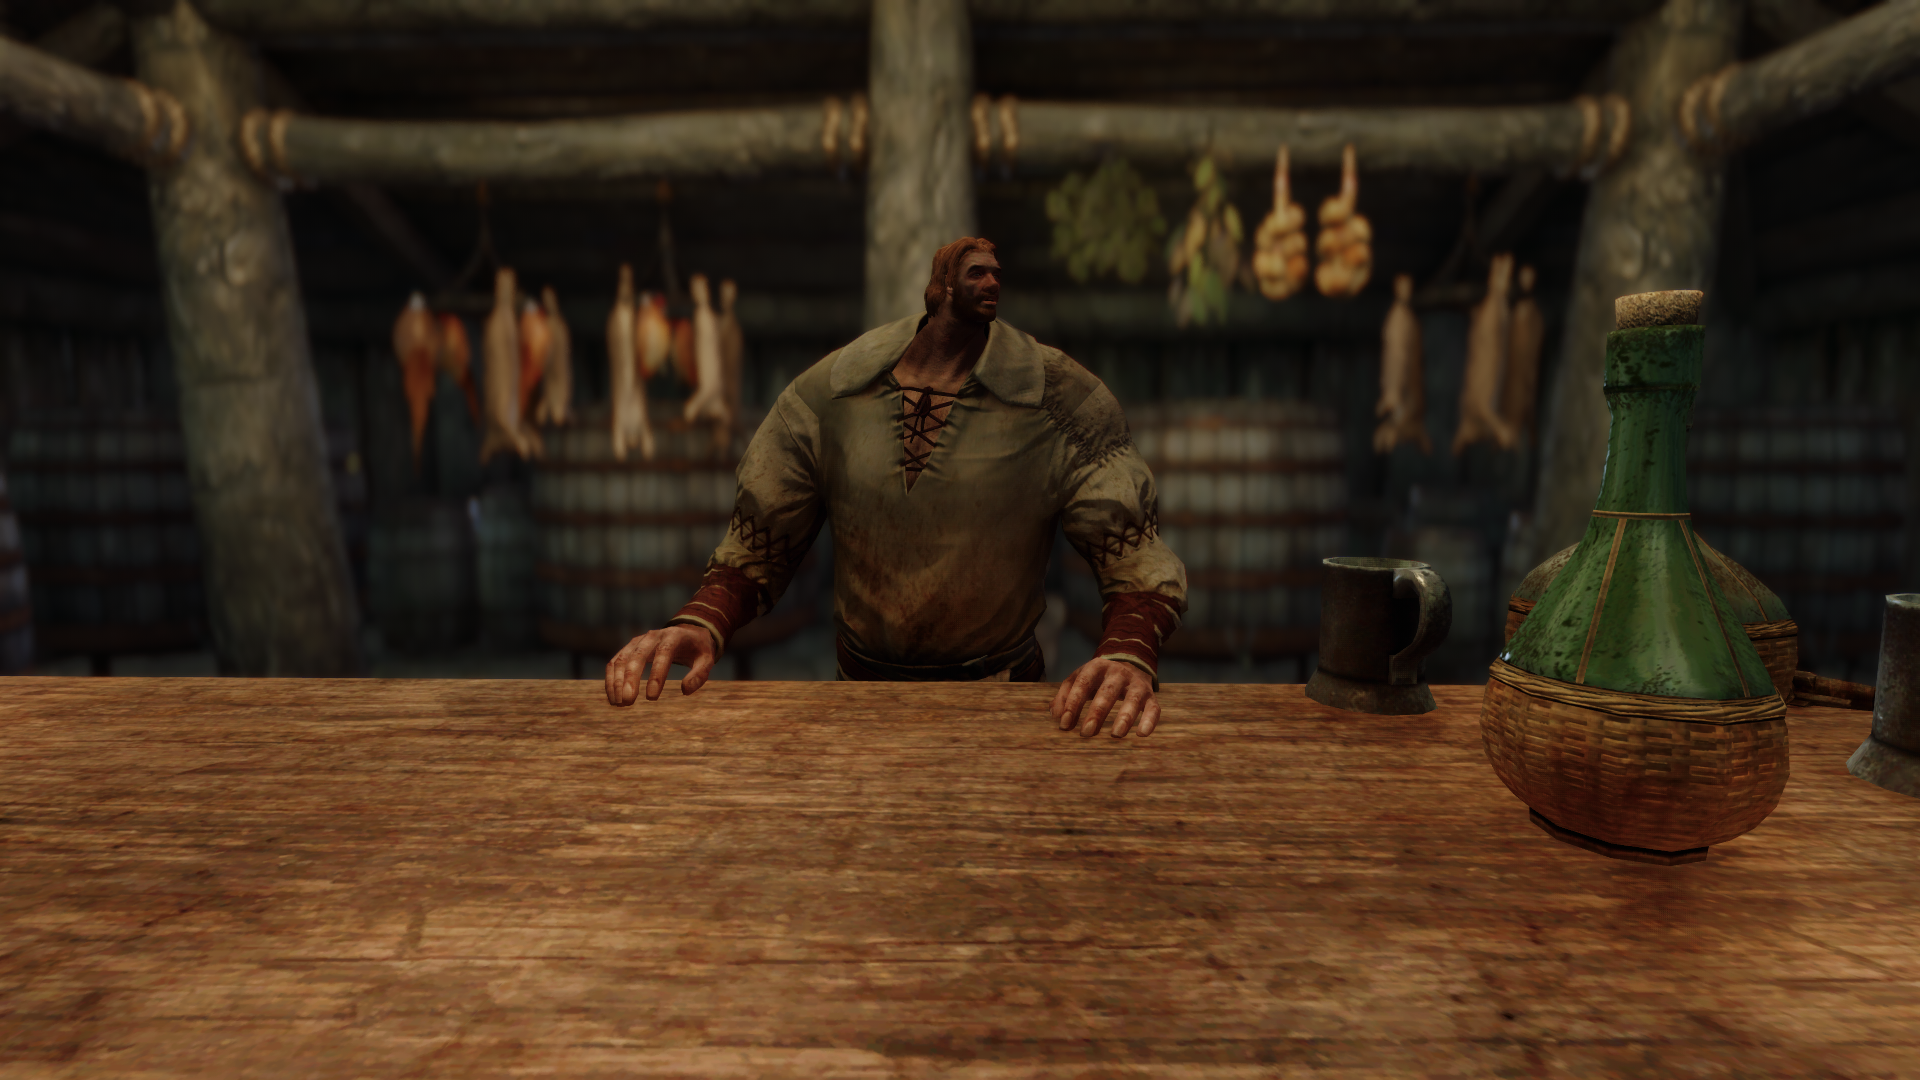 Skyrim’s tiny head mod is a crime against the laws of god and man alike